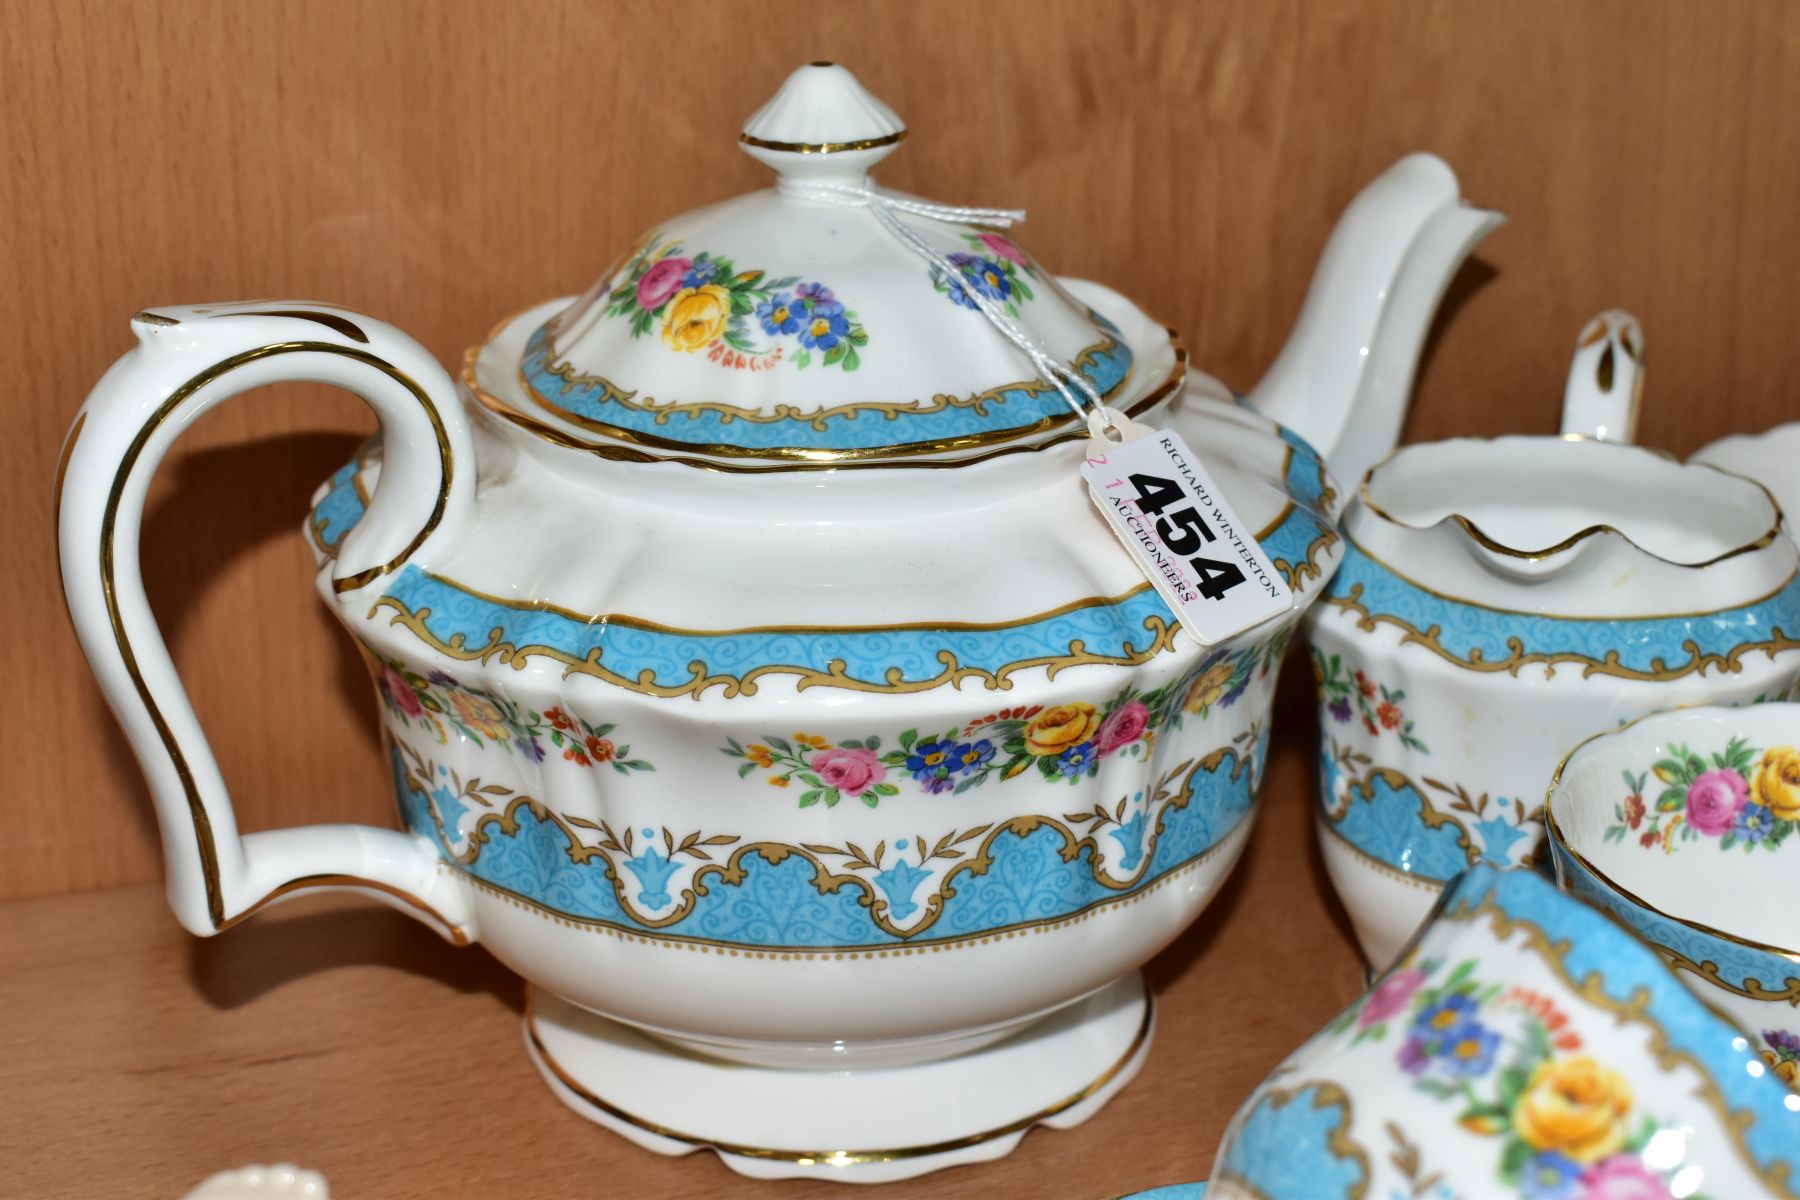 A CROWN STAFFORDSHIRE FINE BONE CHINA FLORAL TEA SET, PATTERN NO. A15793, transfer printed - Image 10 of 10